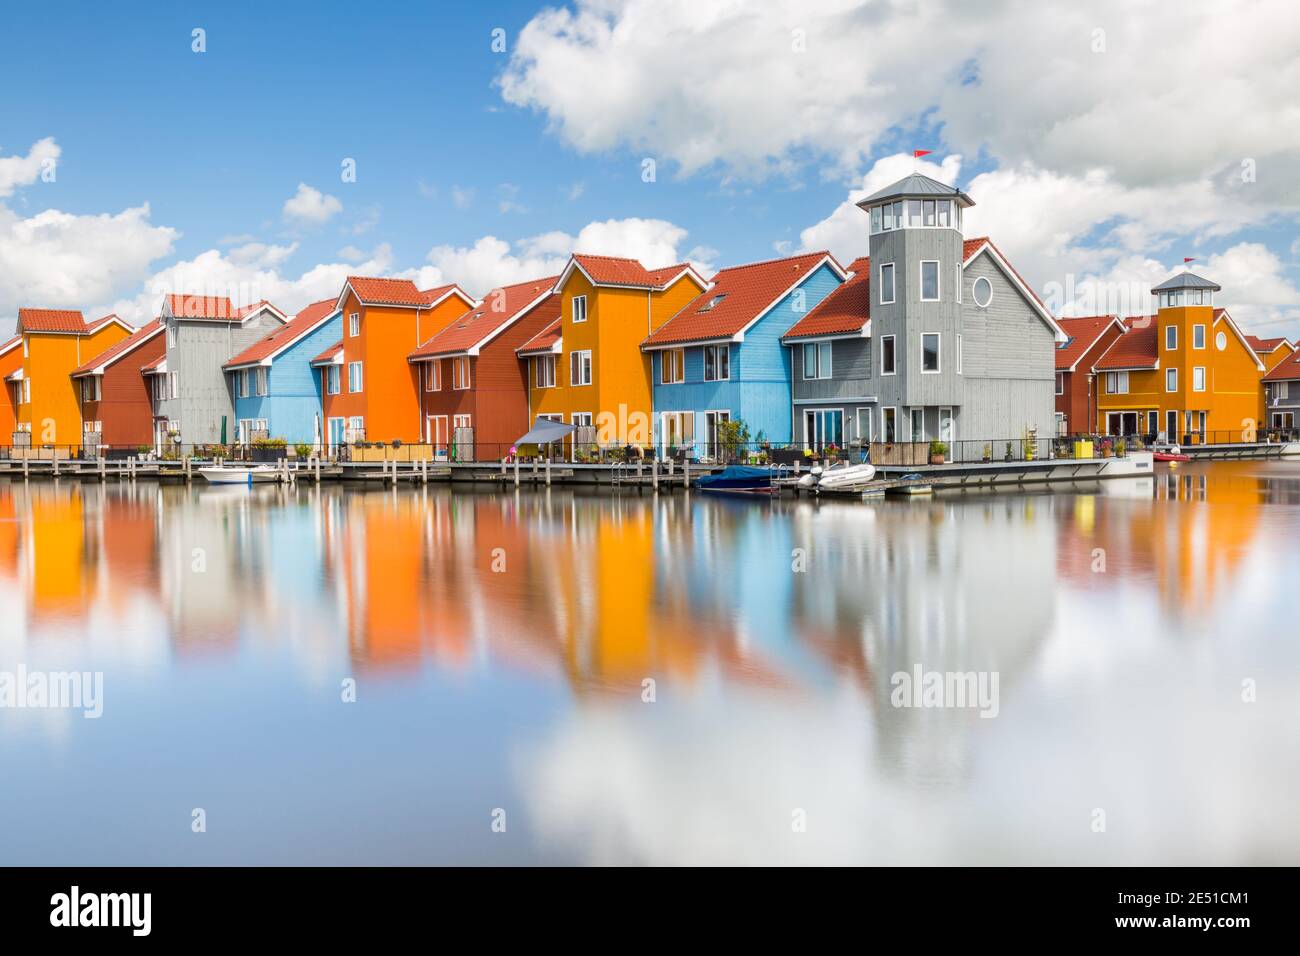 Symmetrical close up of a group of colorful modern dutch water-front houses, under a blue summer sky with puffy clouds Stock Photo